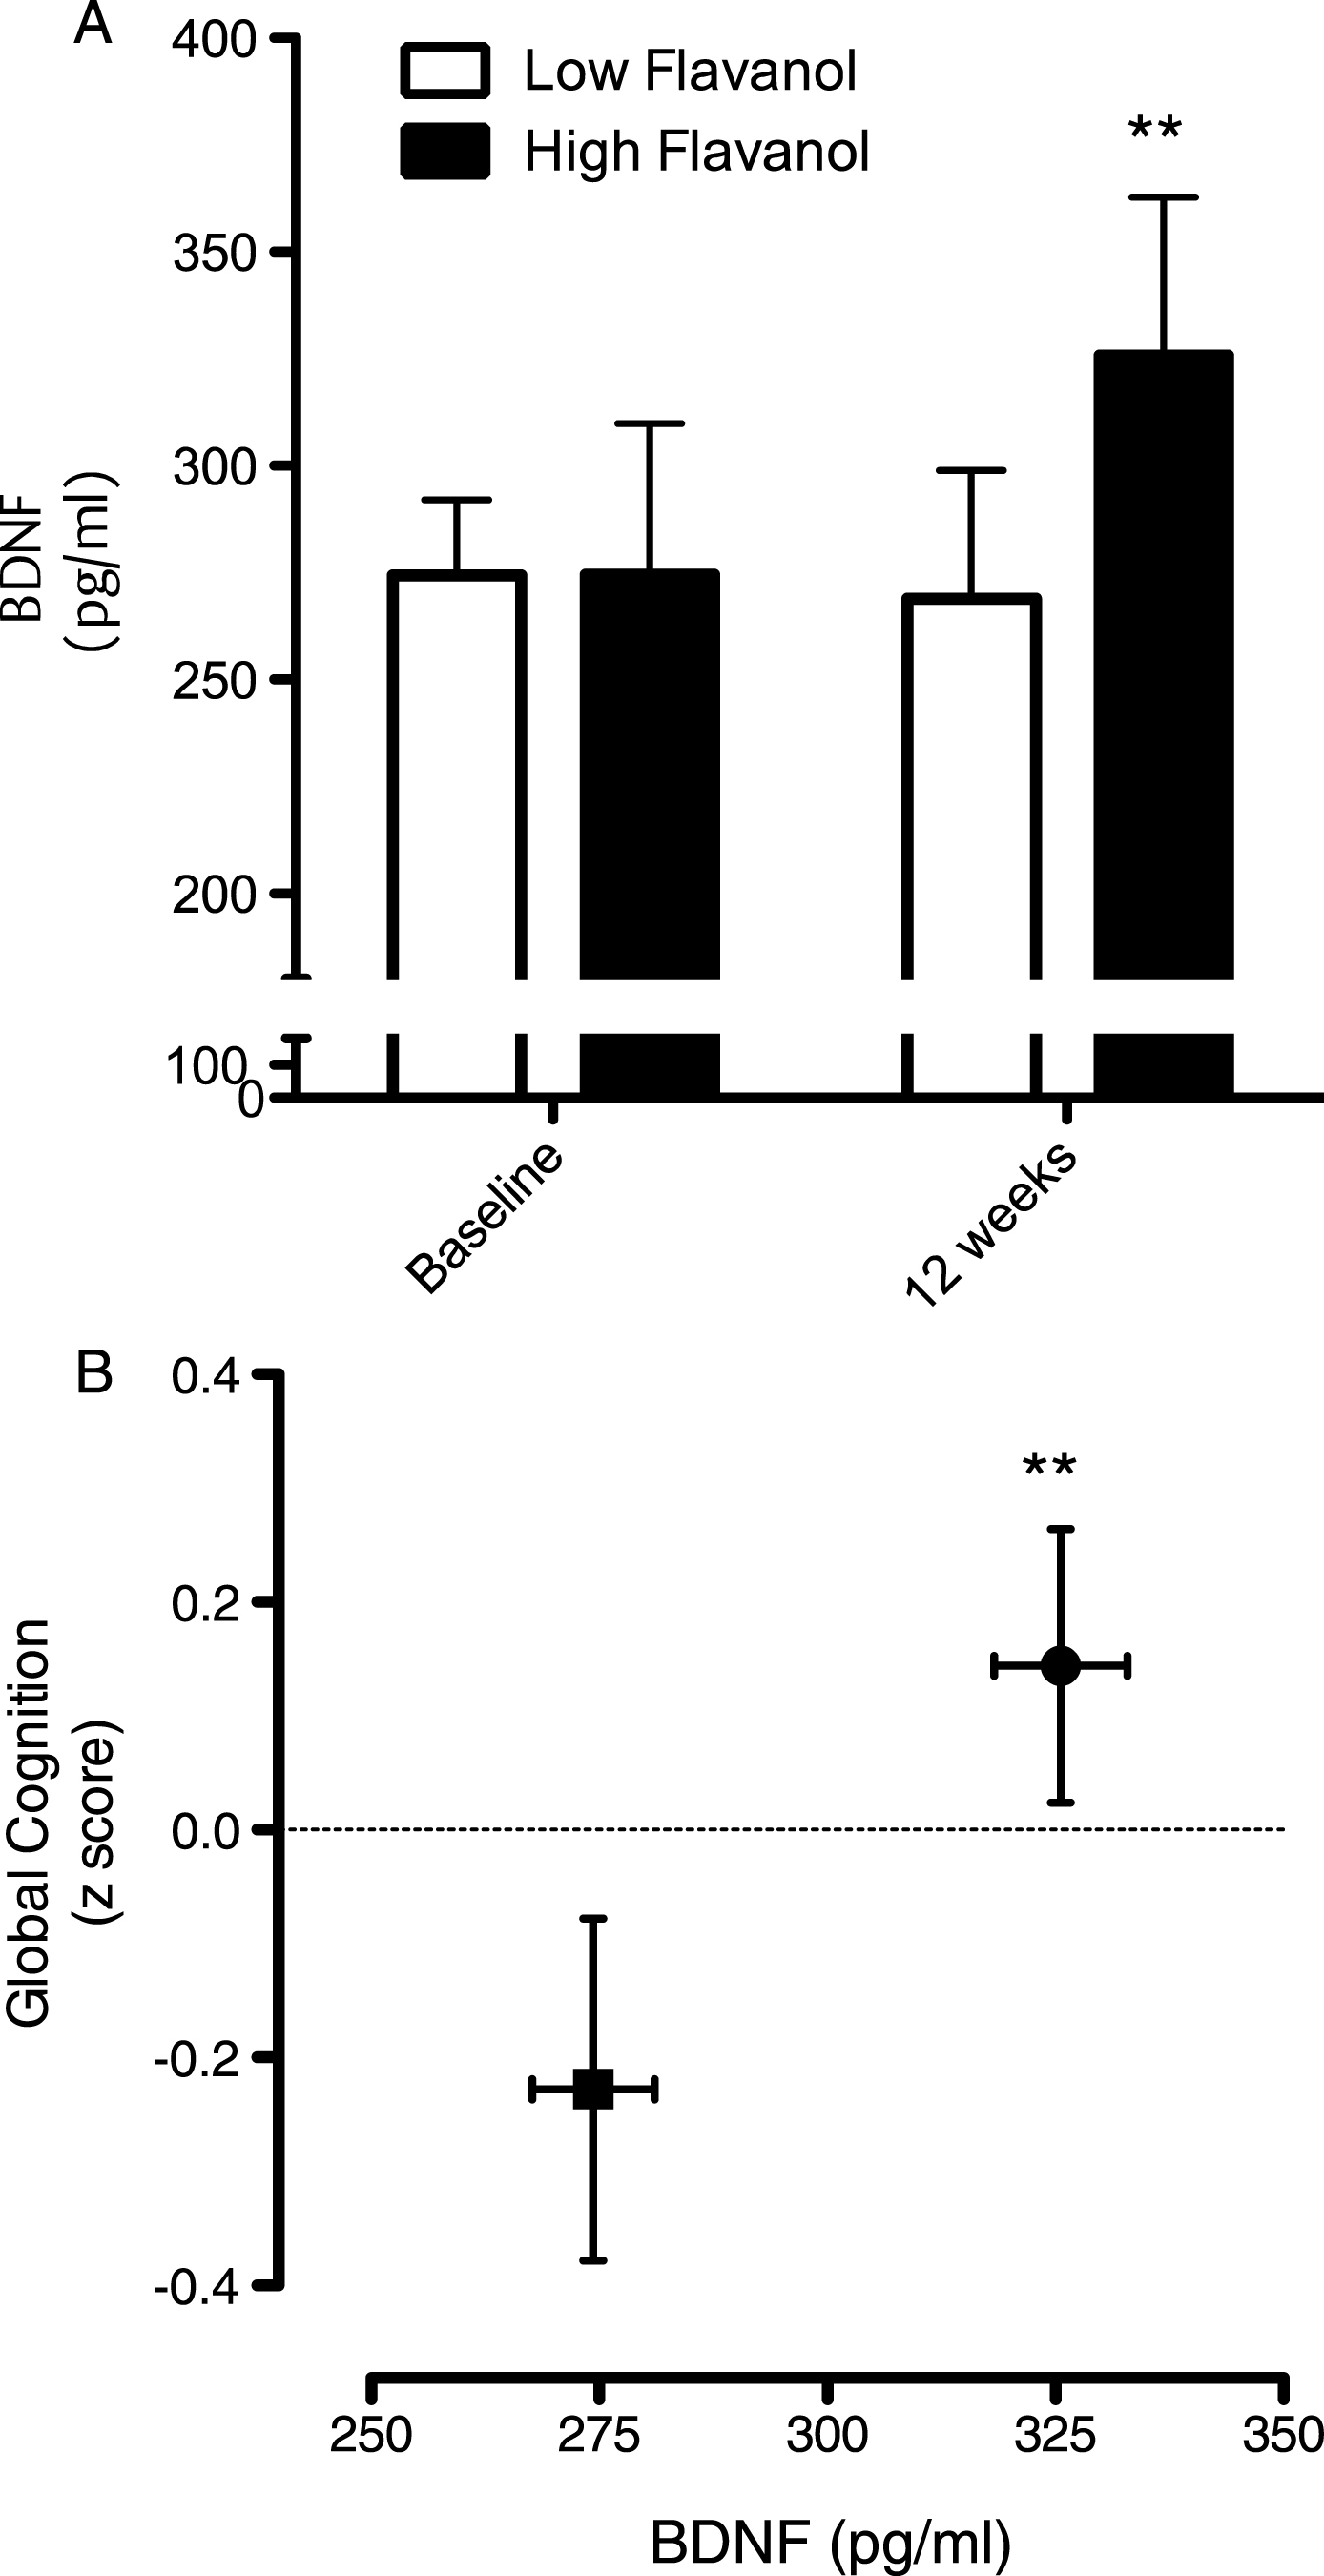 Influence of cocoa flavanol intake on cognition and serum BDNF. (A) Intake of cocoa flavanols for 12 weeks led to a significant increase serum BDNF levels, relative to the low flavanol cocoa intervention (**p < 0.01). (B) Impact of cocoa flavanol intake on global cognition function, plotted with serum BDNF levels (Baseline: ν= 40; 12 weeks). Cognitive performance was significantly greater (**p < 0.01) following high flavanol intake relative to the low flavanol control. All data are plotted as mean values±SEM (n = 40).